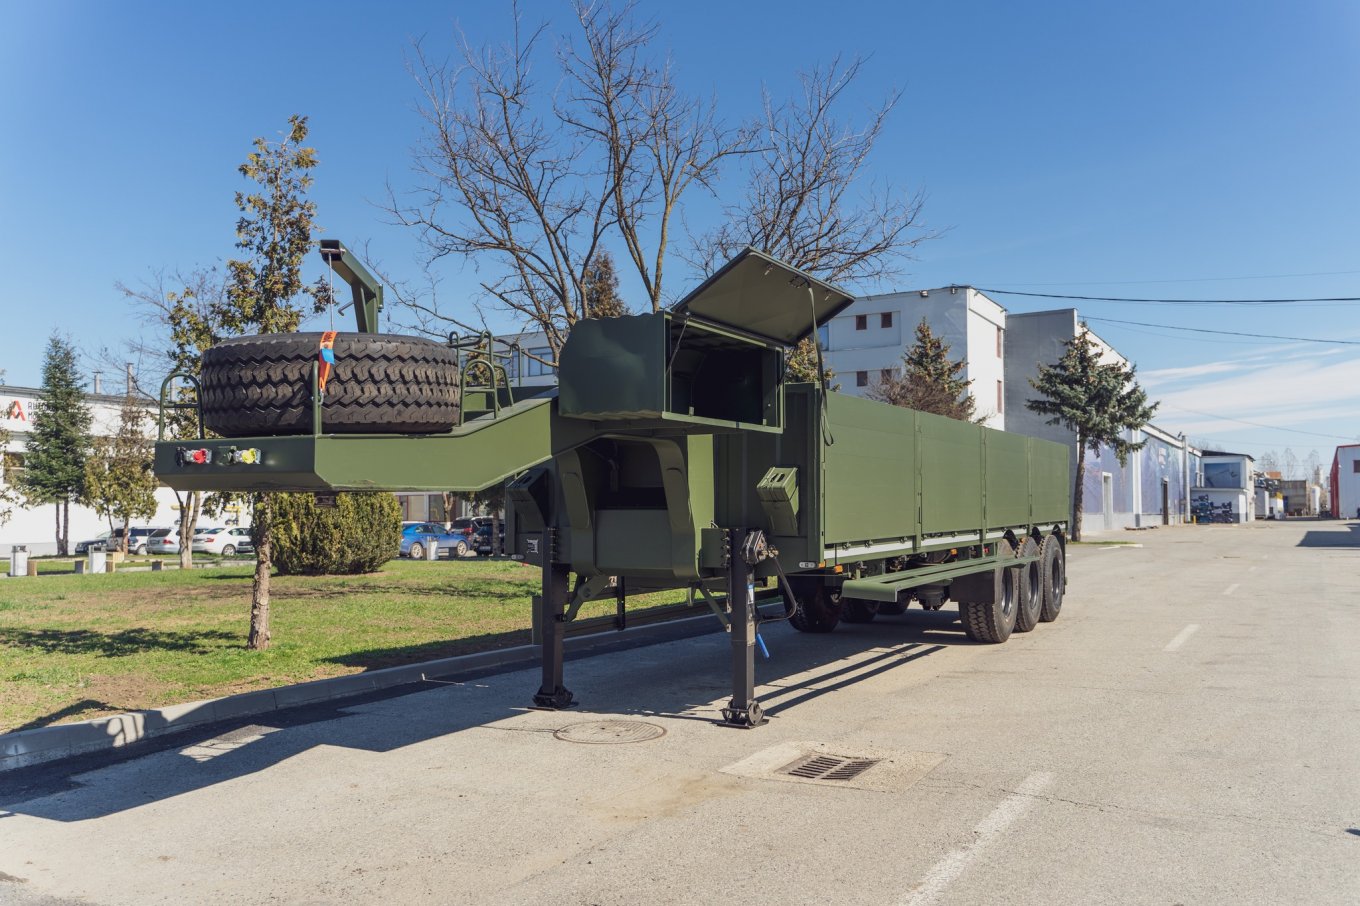 Rheinmetall takes a significant step in its global expansion strategy by acquiring a 72.5% controlling stake in Automecanica Mediaș Defense Express Rheinmetall Acquires Majority Stake in Romanian Company: a Strategic Move in Defense Expansion